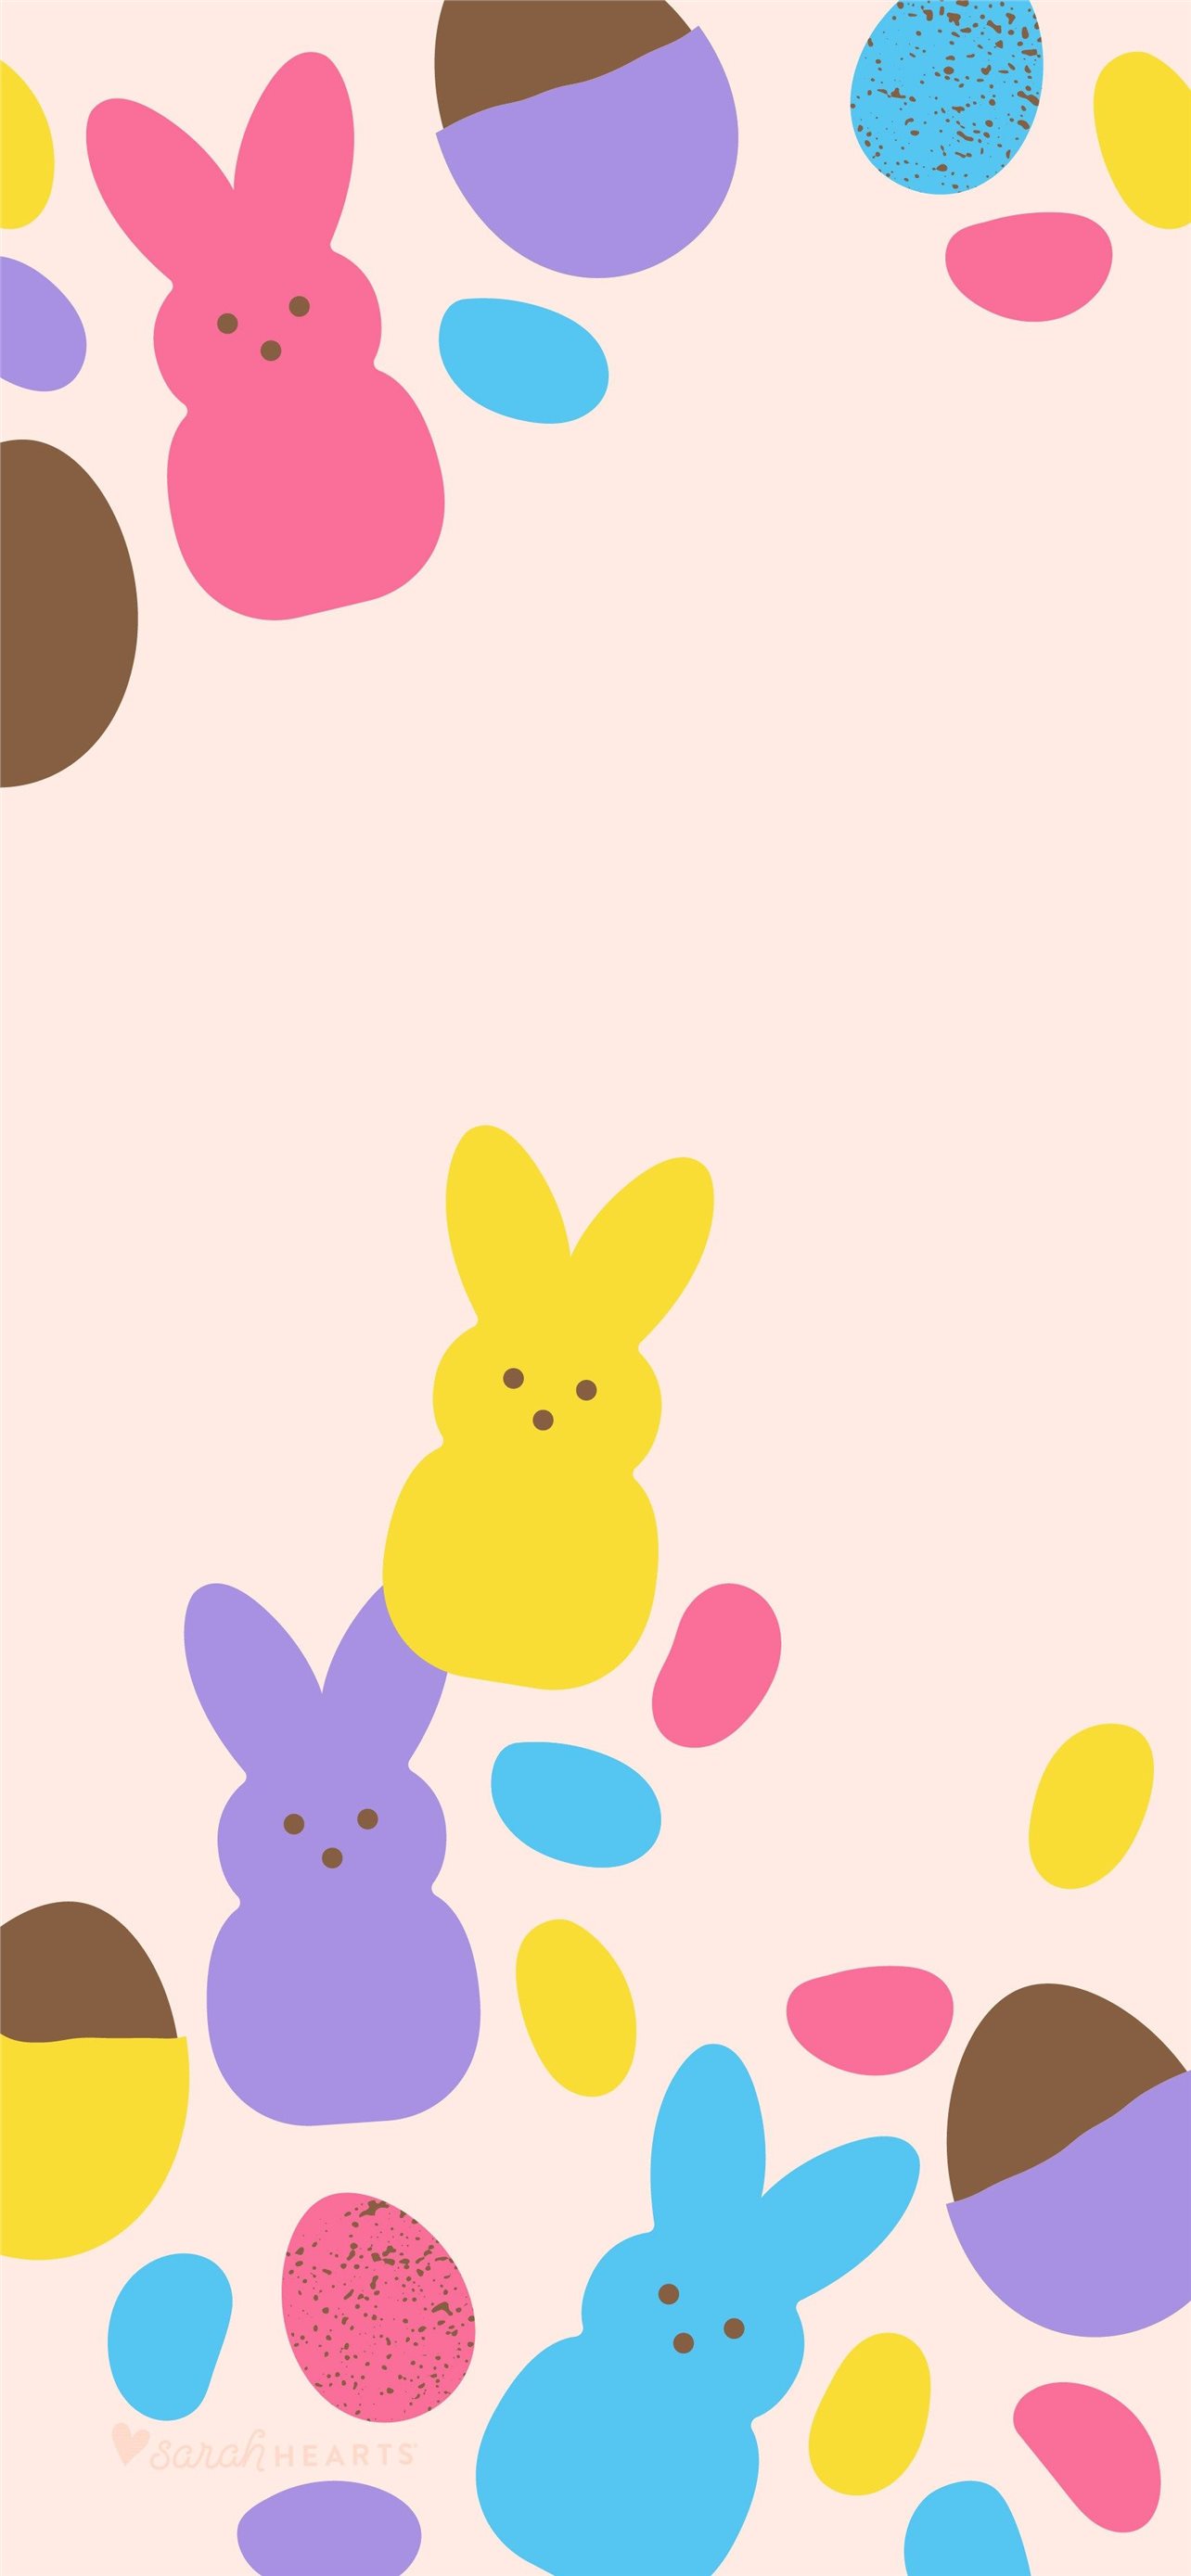 Easter Day Eggs Wallpaper  Free iPhone Wallpapers  Iphone wallpaper easter  Easter wallpaper Iphone wallpaper